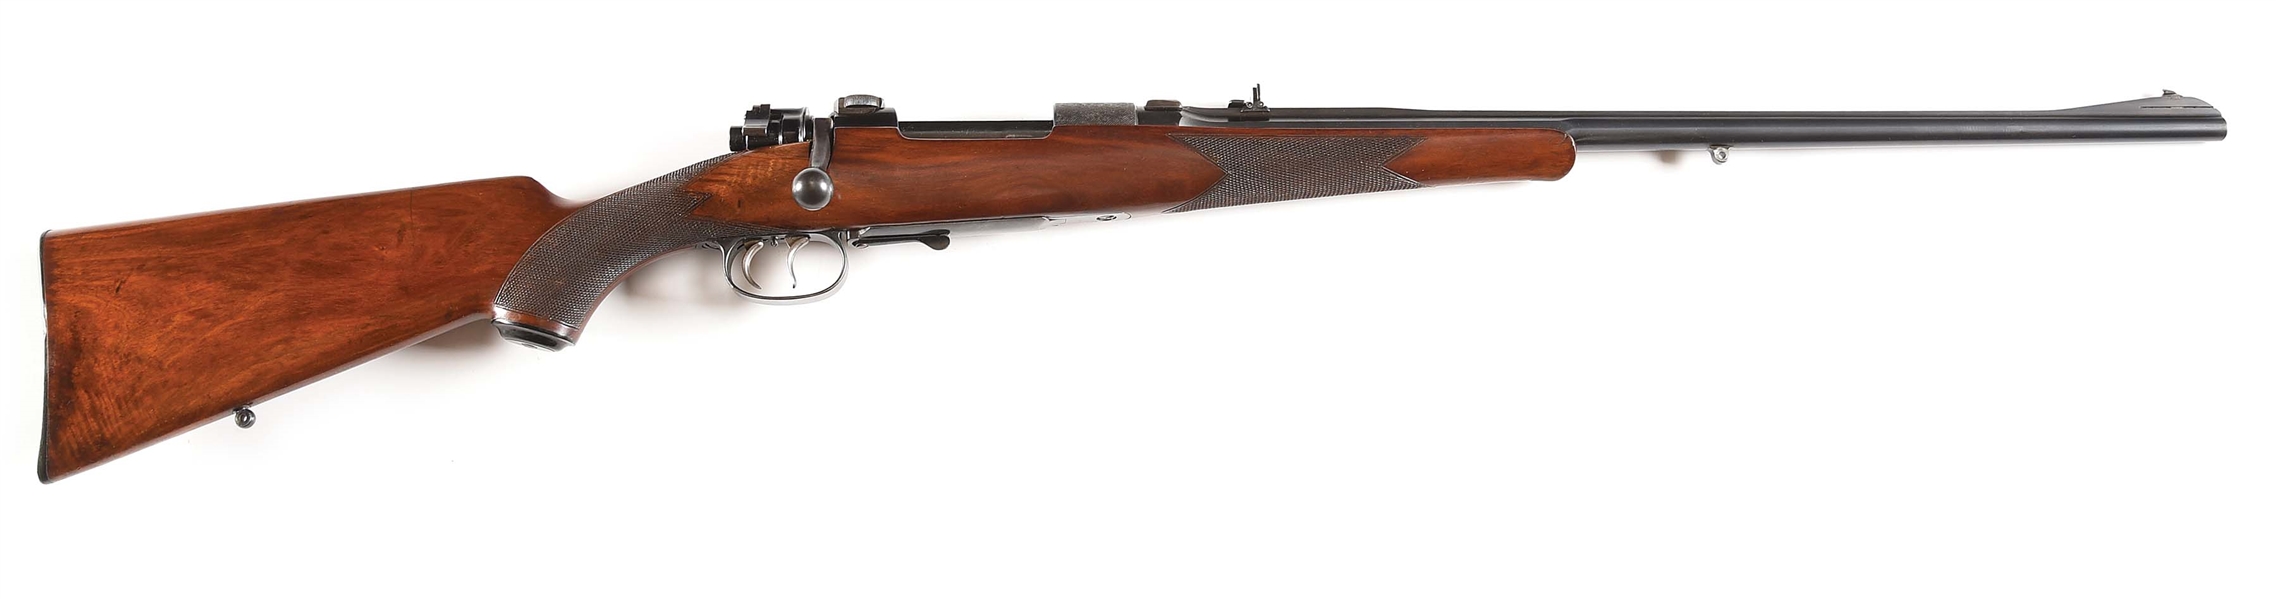 (C) MAUSER BOLT ACTION SPORTING RIFLE.